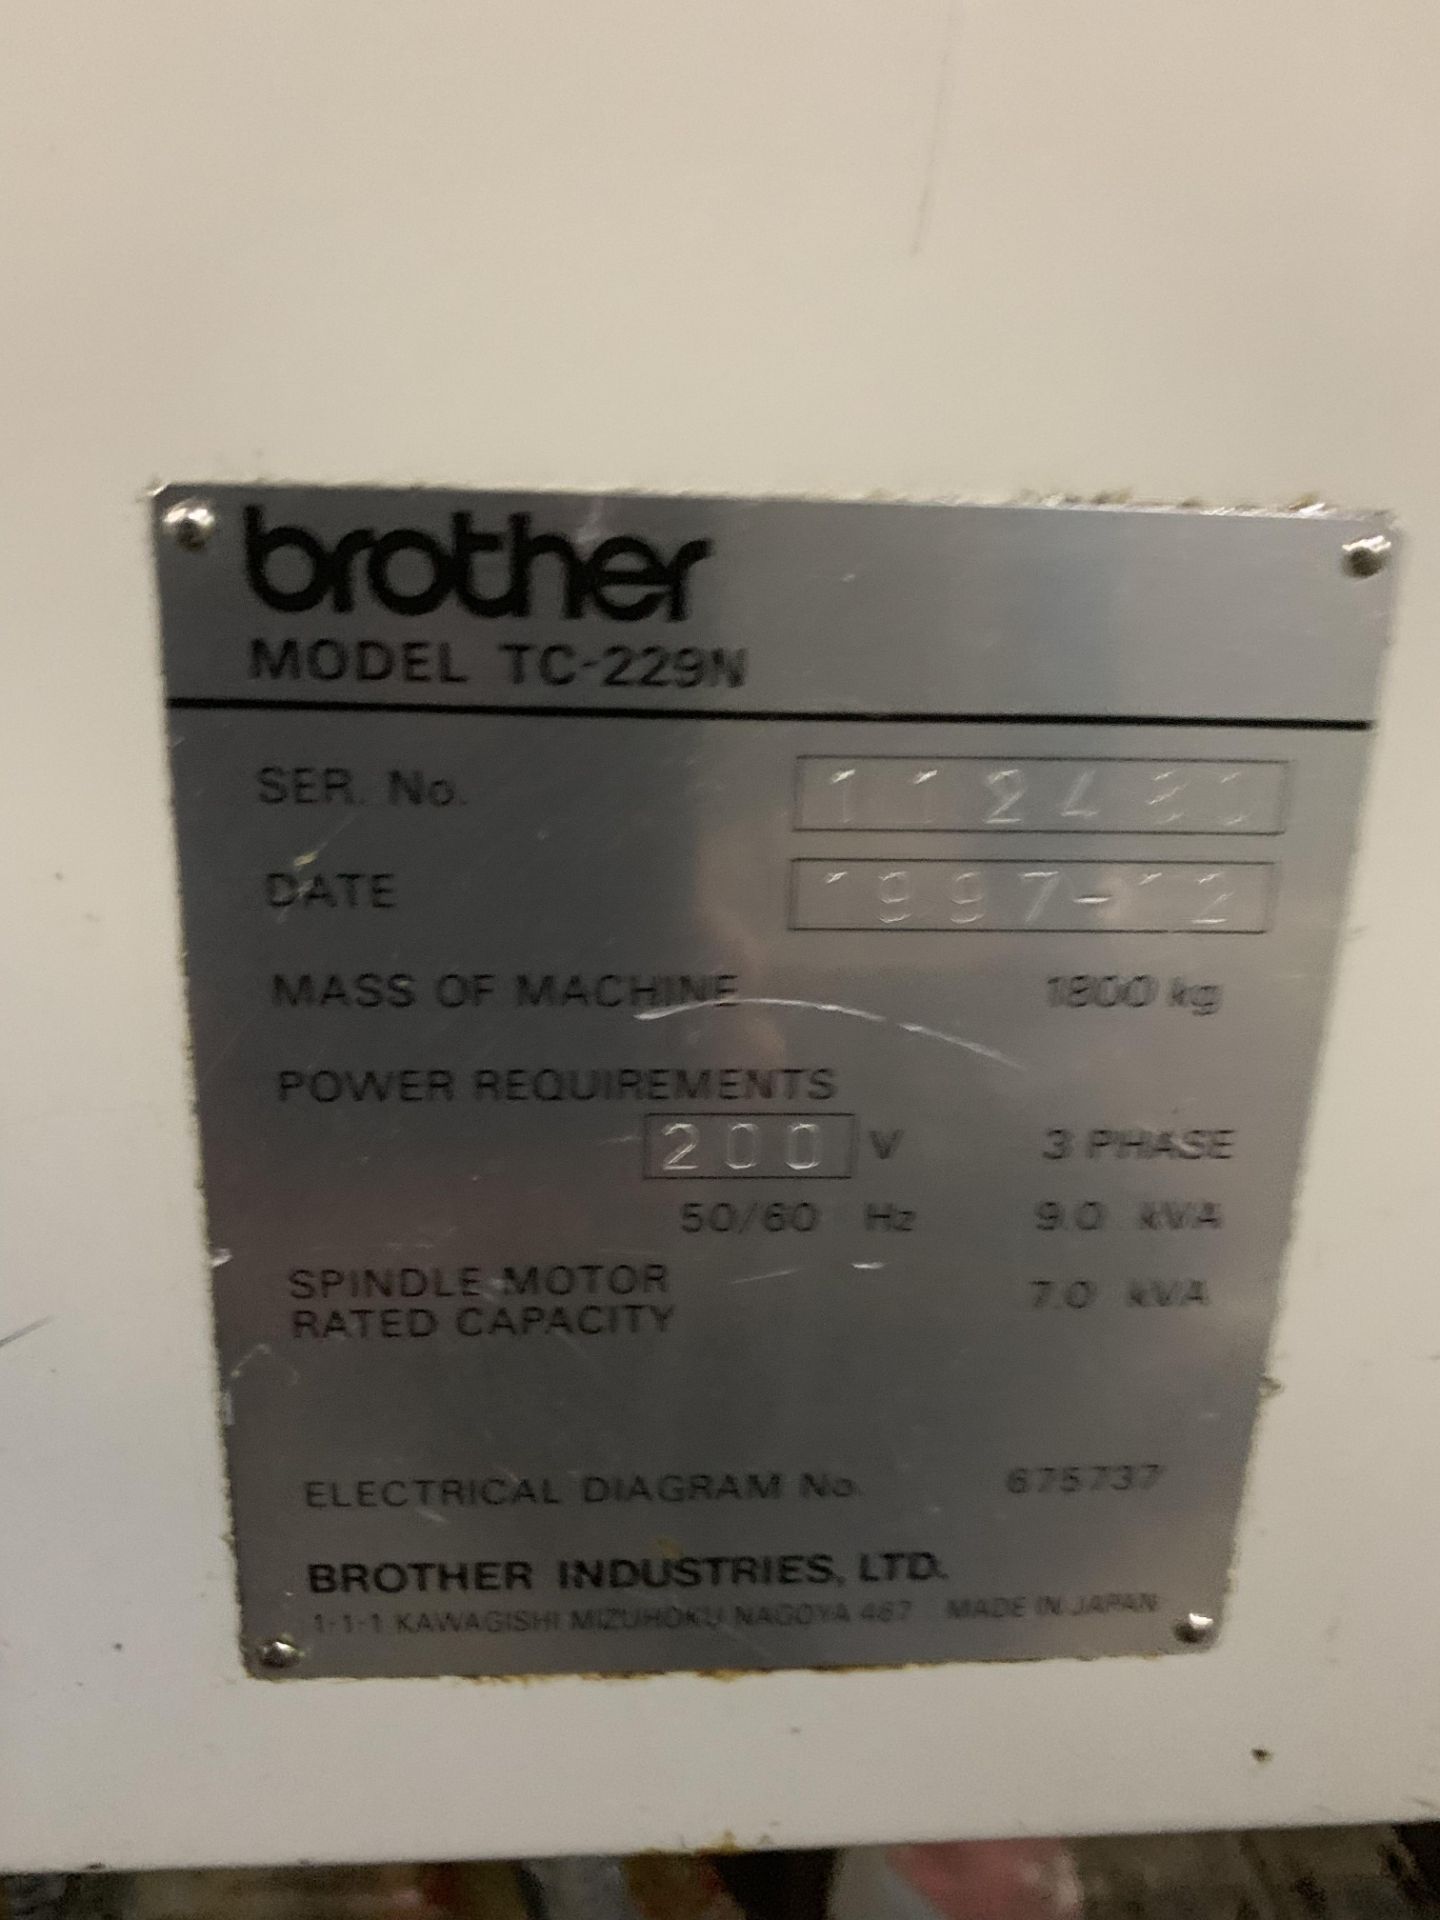 Brother TC-S229 CNC Tapping Center - Image 15 of 21